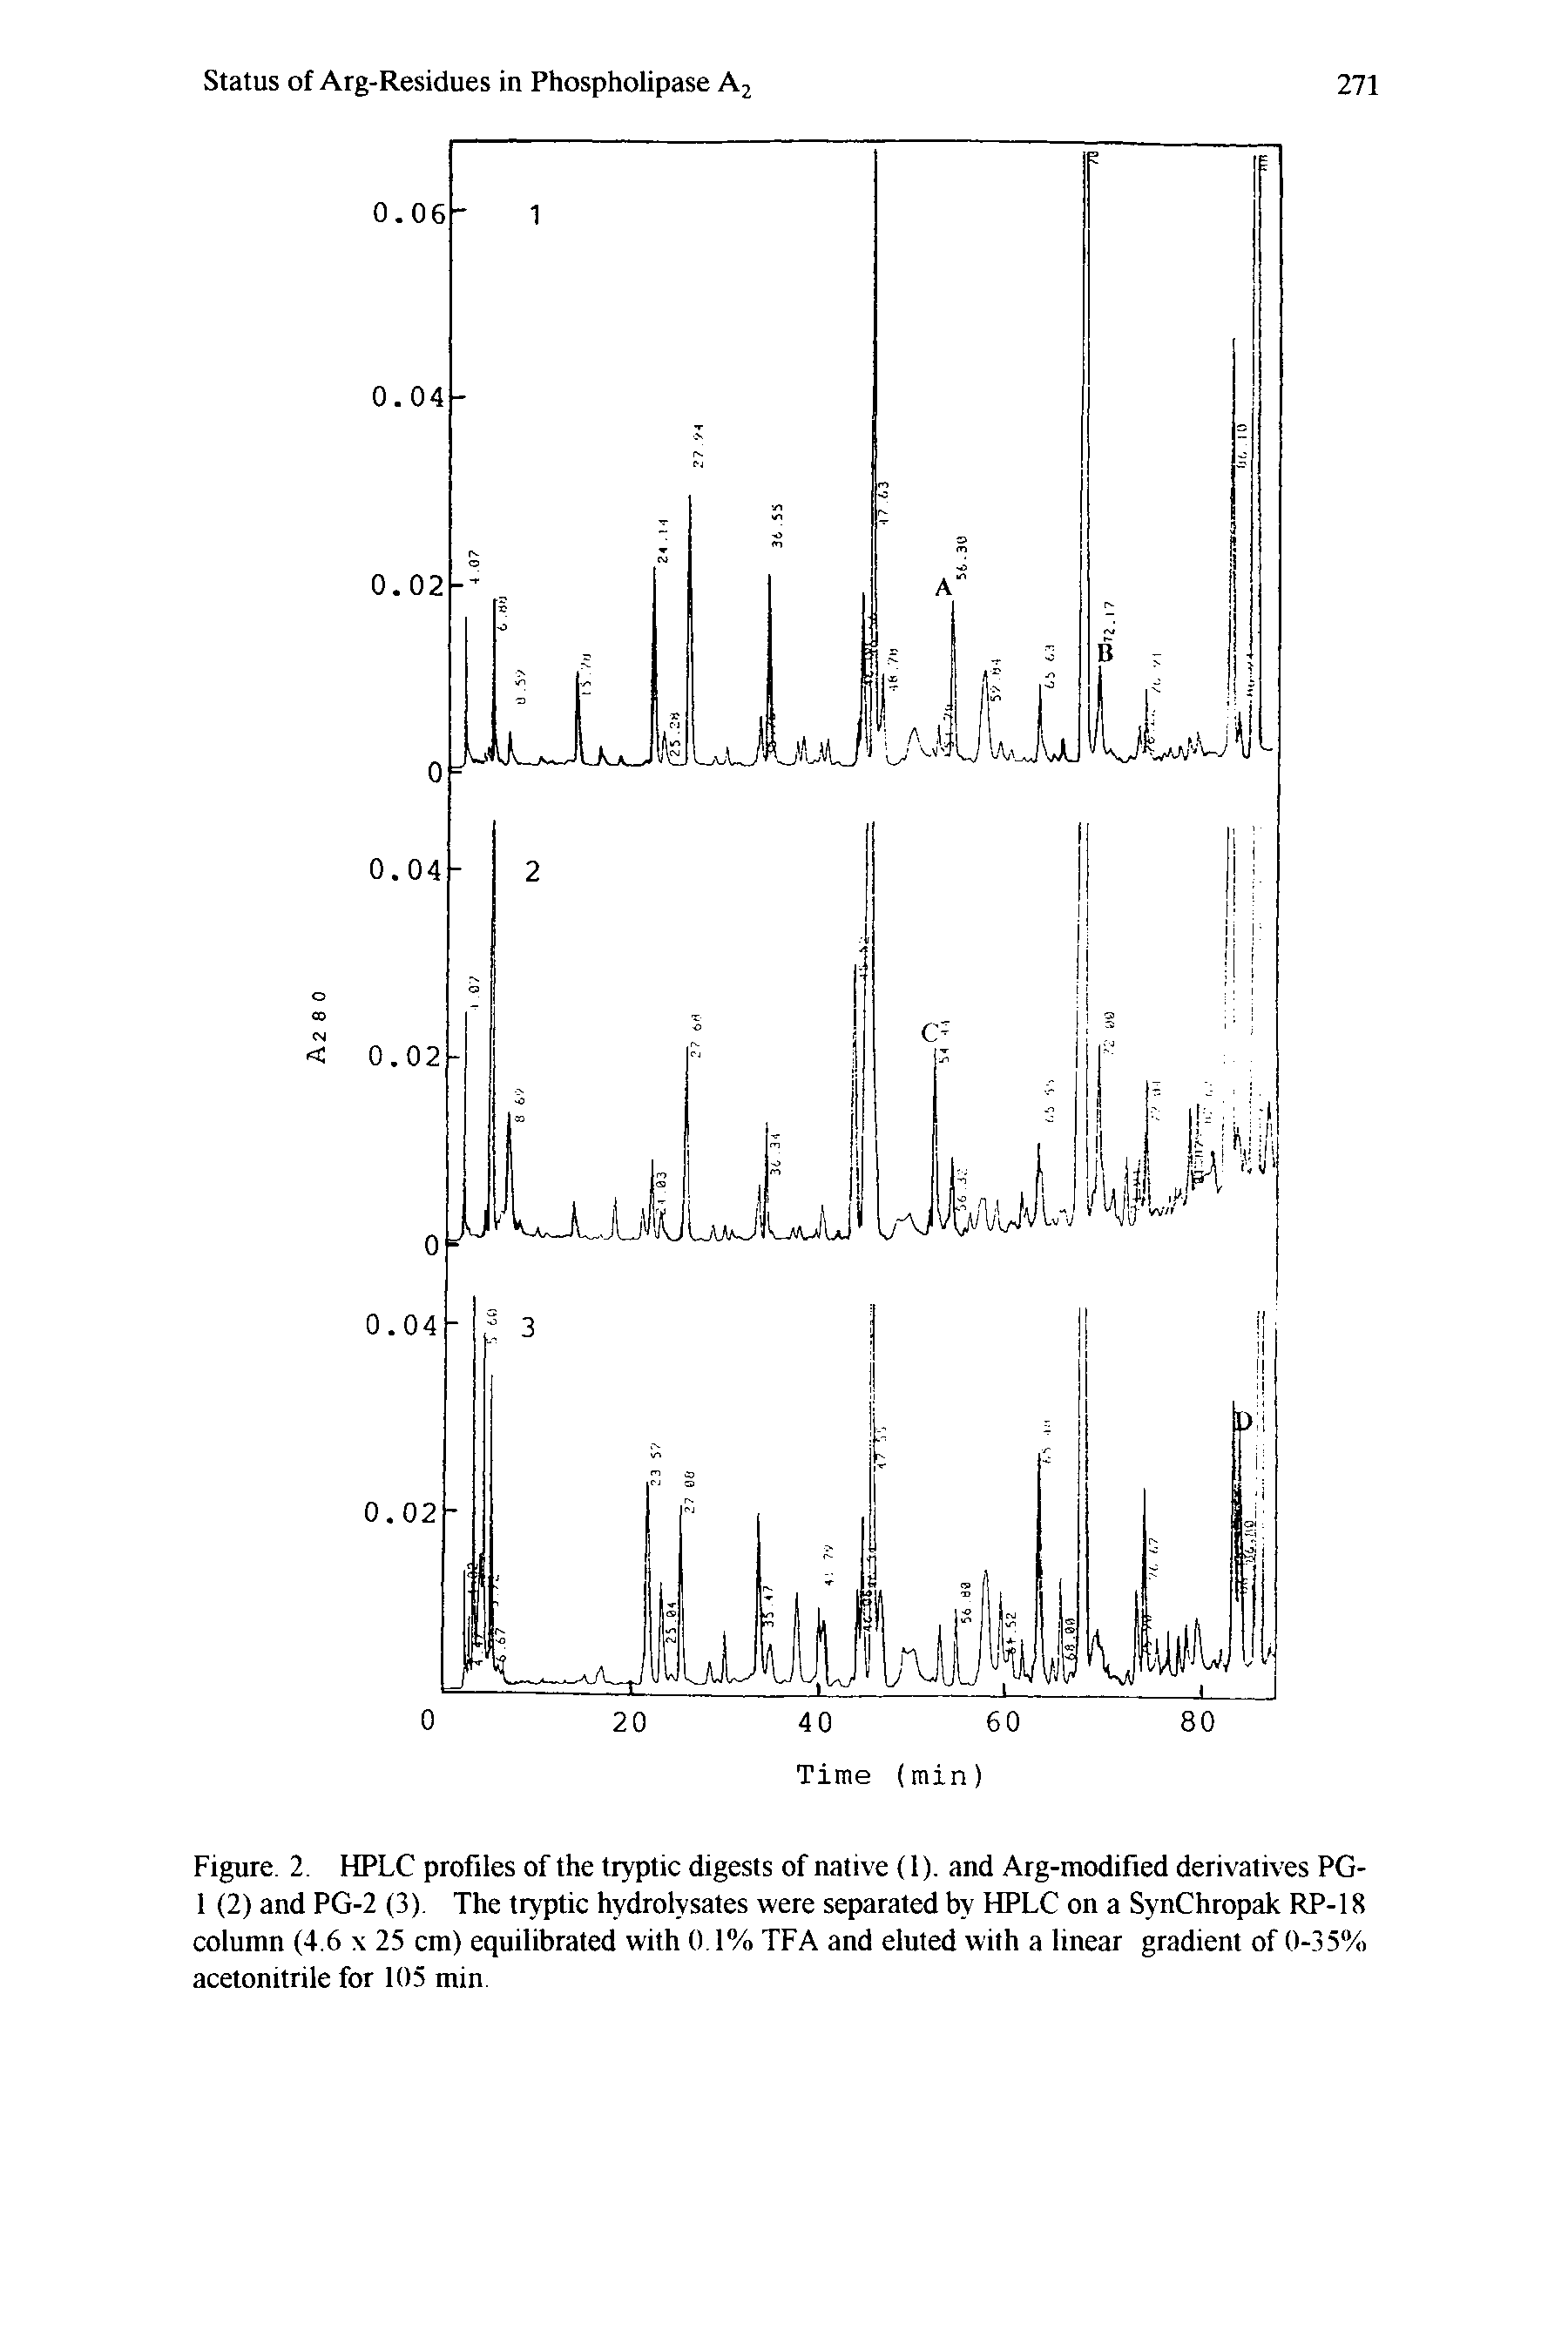 Figure. 2. HPLC profiles of the tryptic digests of native (1). and Arg-modified derivatives PG-1 (2) and PG-2 (3) The tryptic hydrolysates were separated by HPLC on a SynChropak RP-18 column (4.6 x 25 cm) equilibrated with 0 1% TFA and eluted with a linear gradient of 0-35% acetonitrile for 105 min...